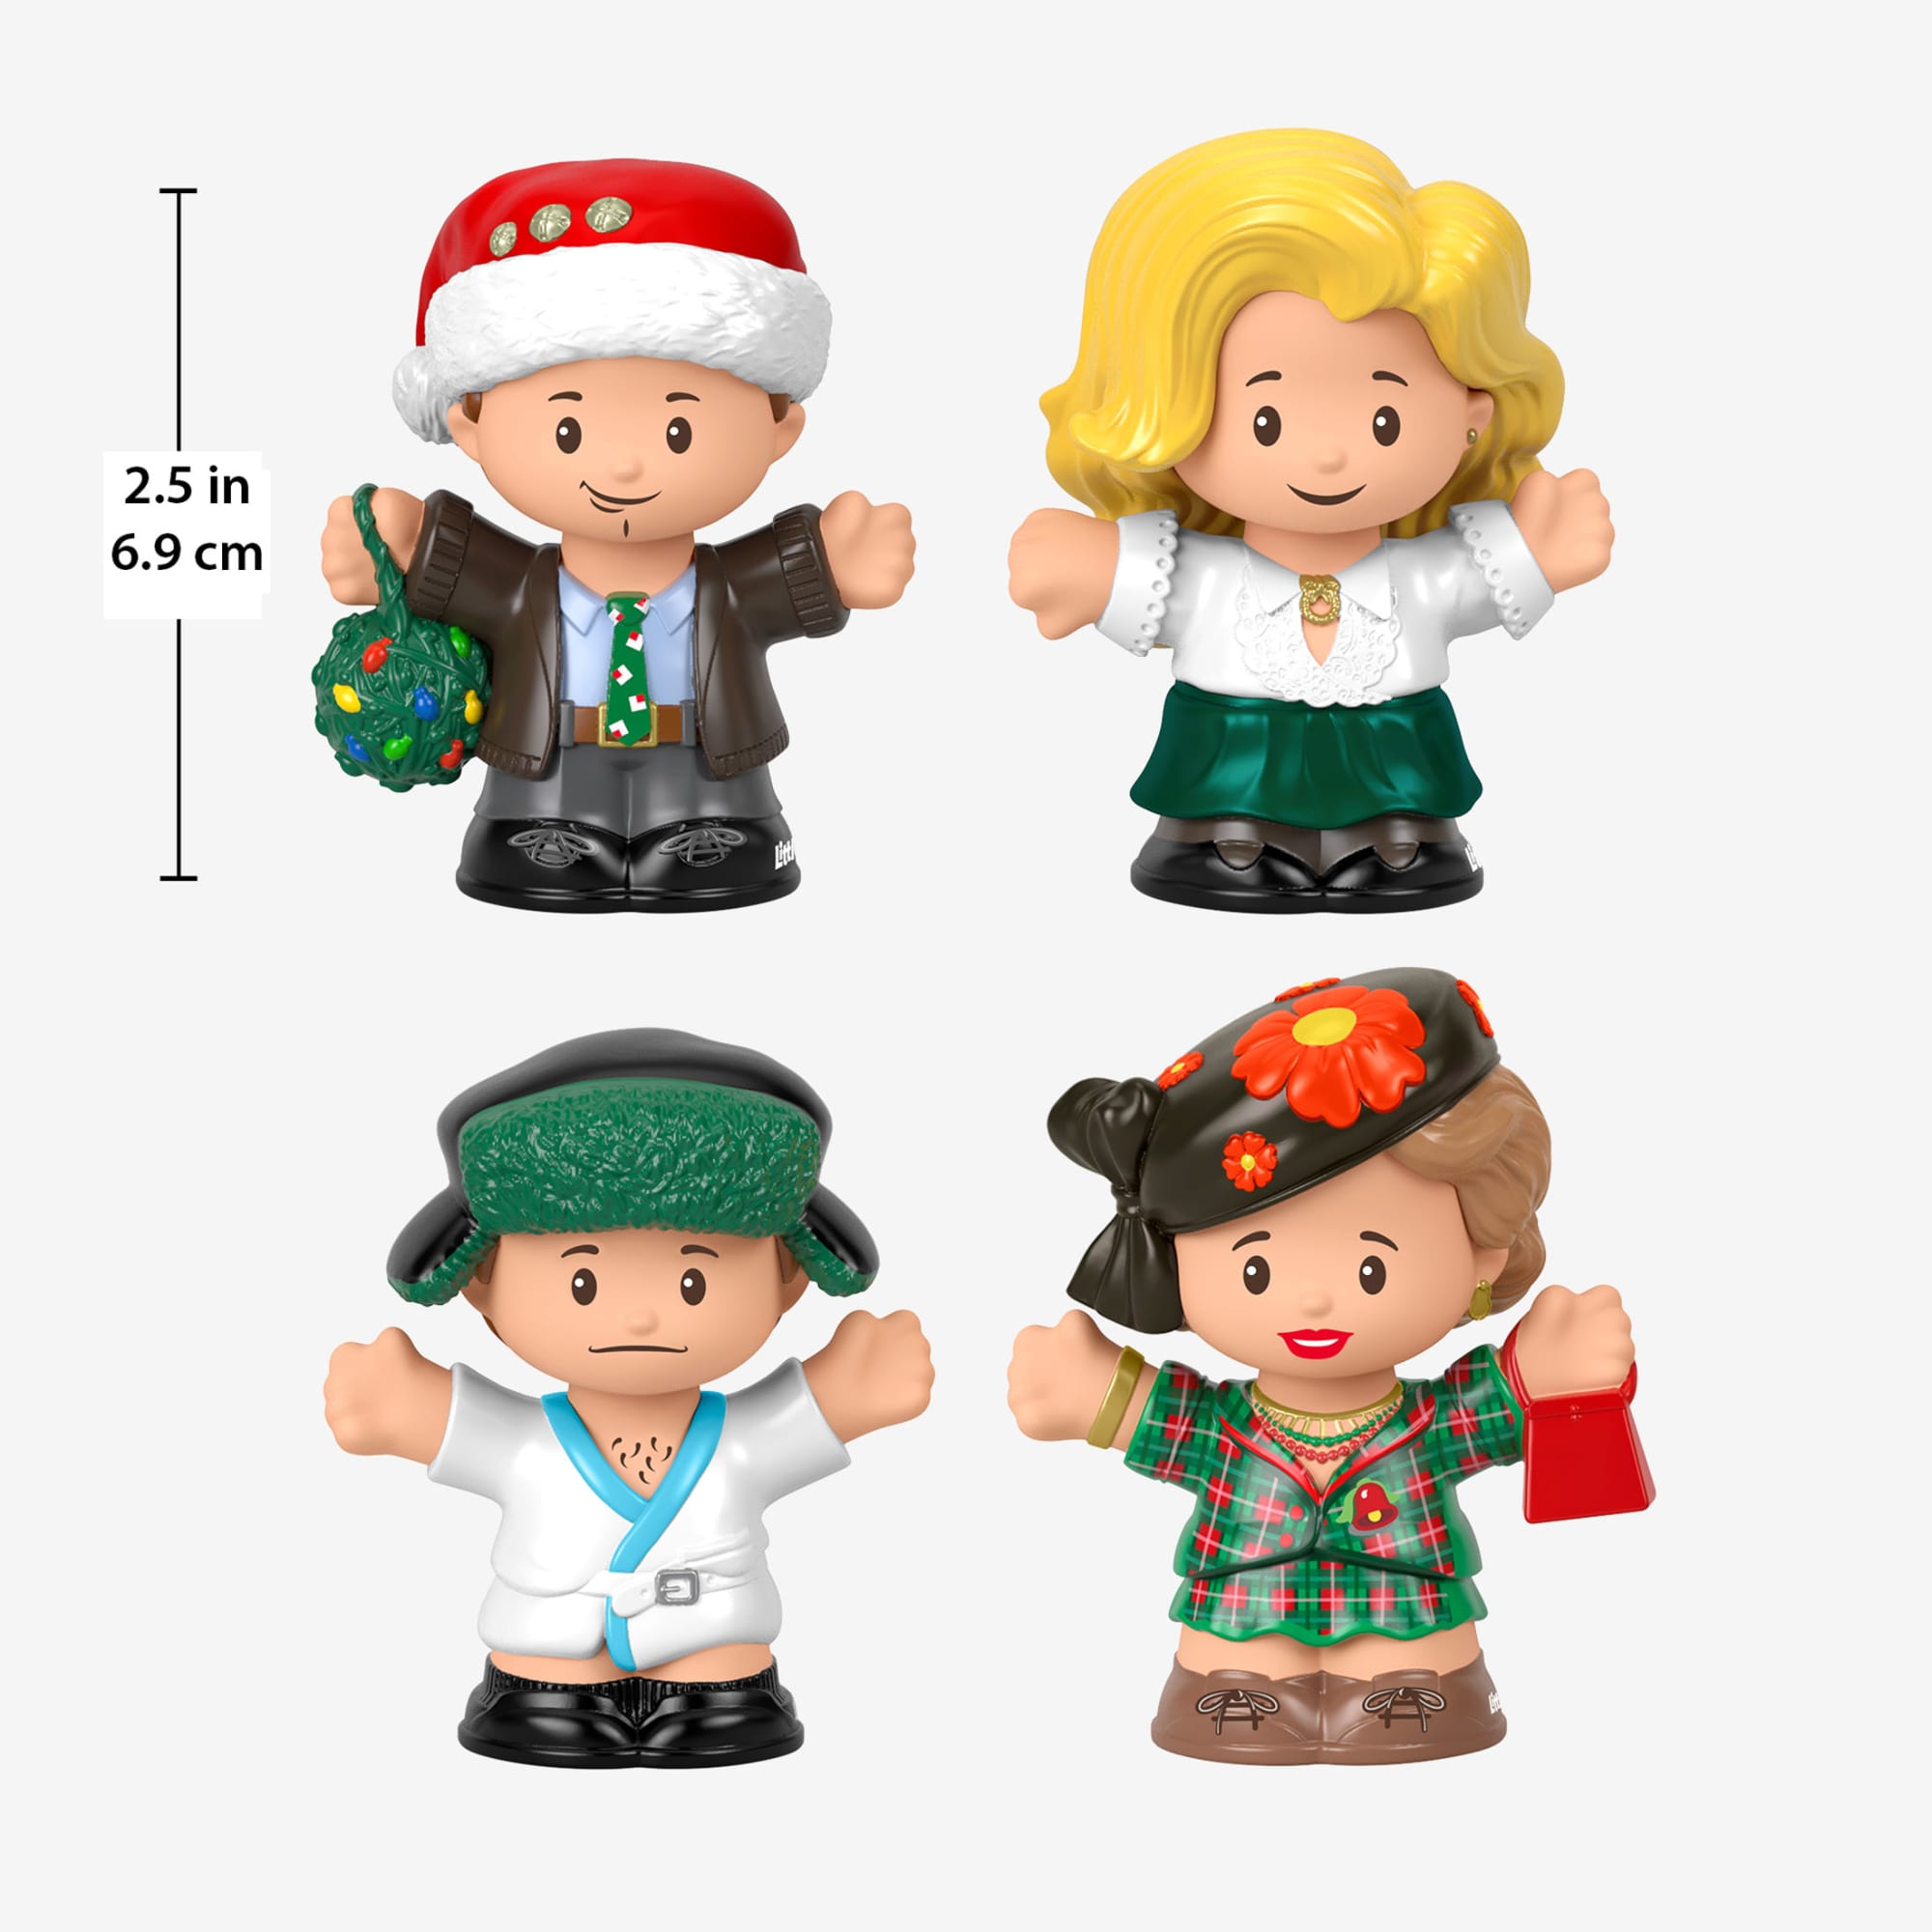 Little People Collector™ National Lampoon's Christmas Vacation